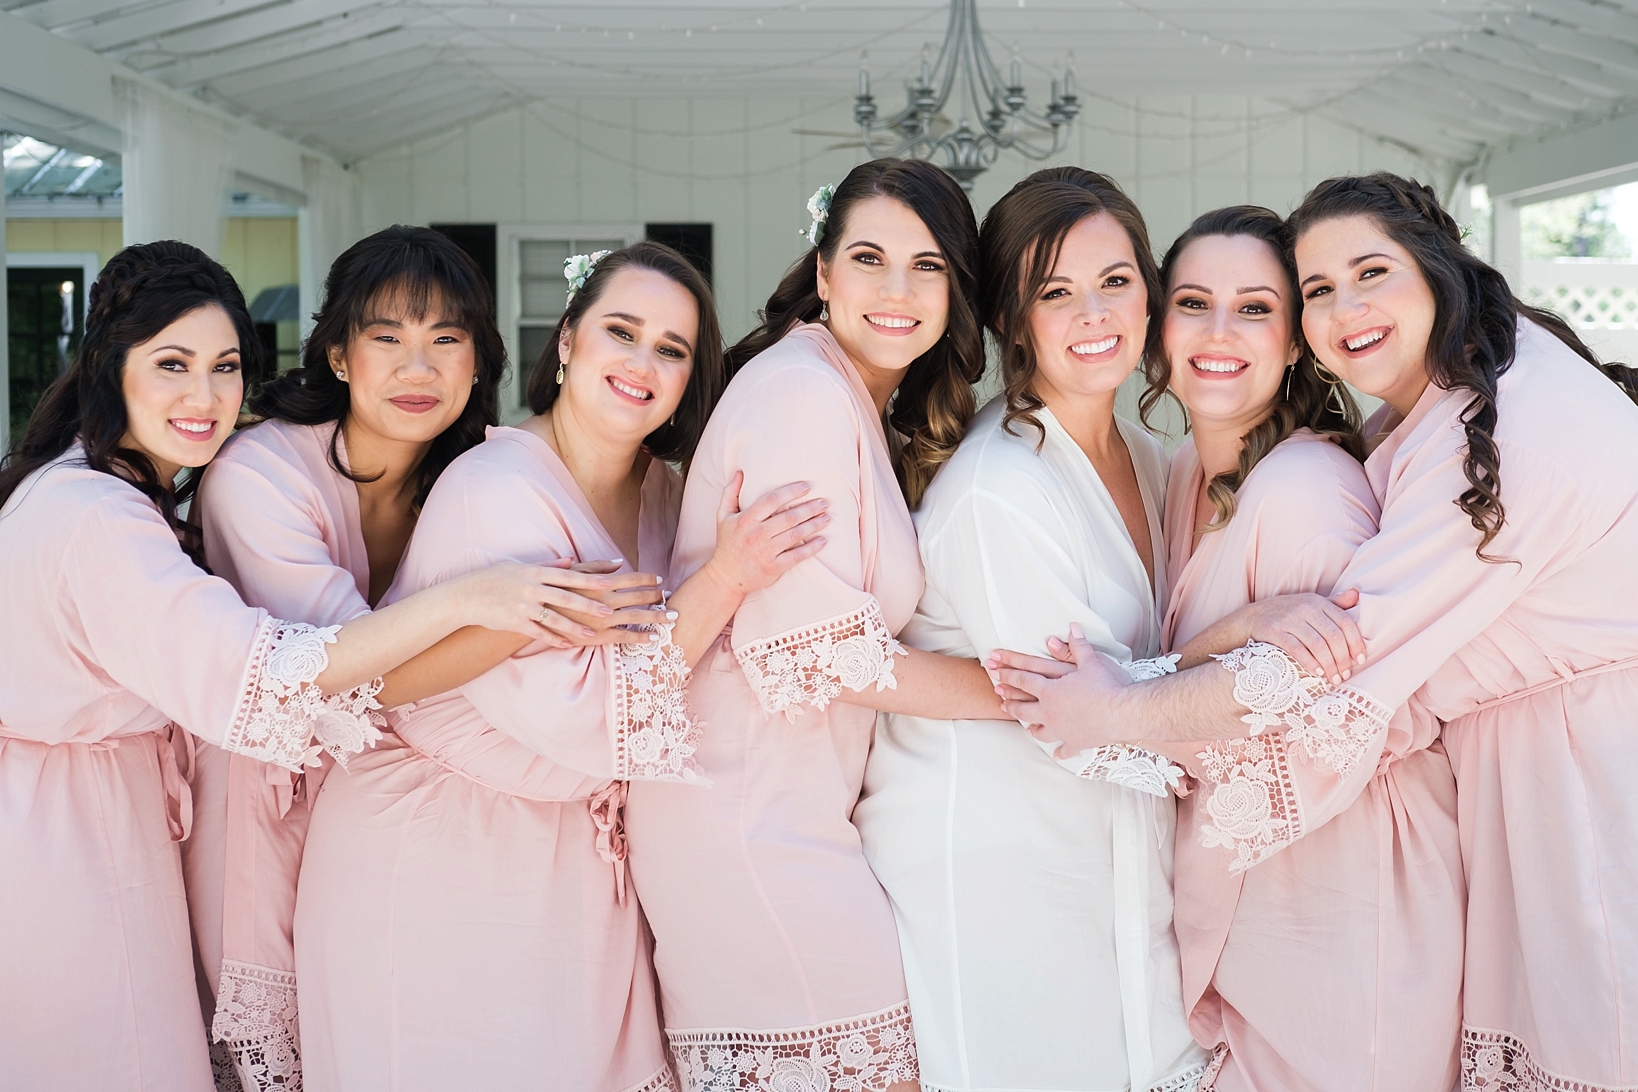 The Bride and her Bridesmaids share a big hug before her Cross Creek Ranch wedding